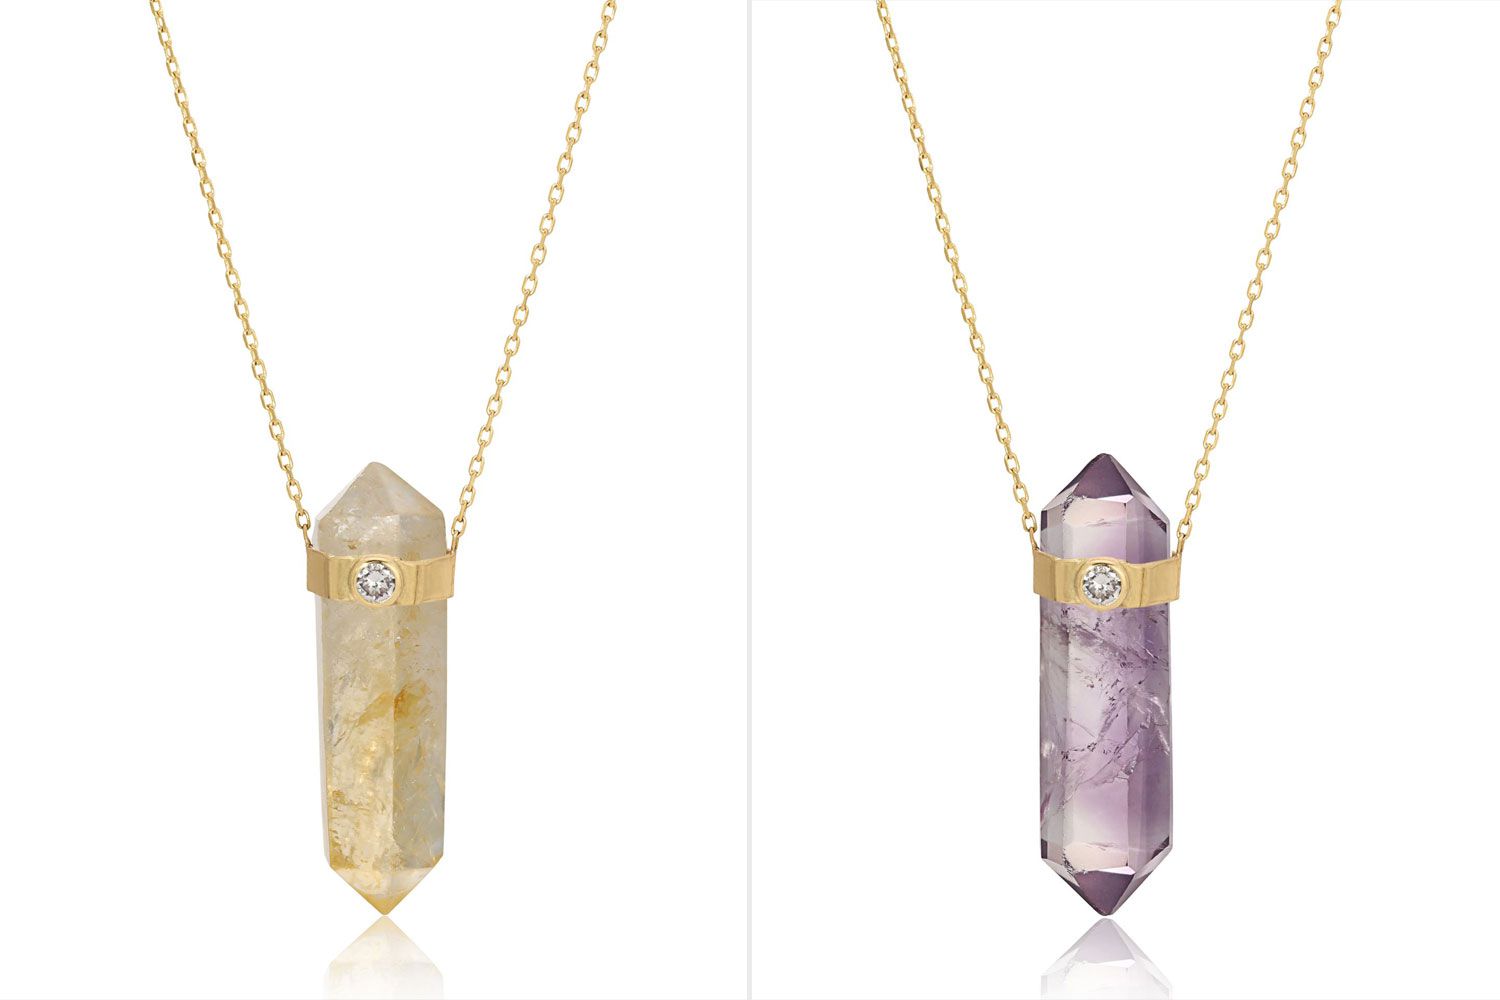 necklaces from Maya Brenner